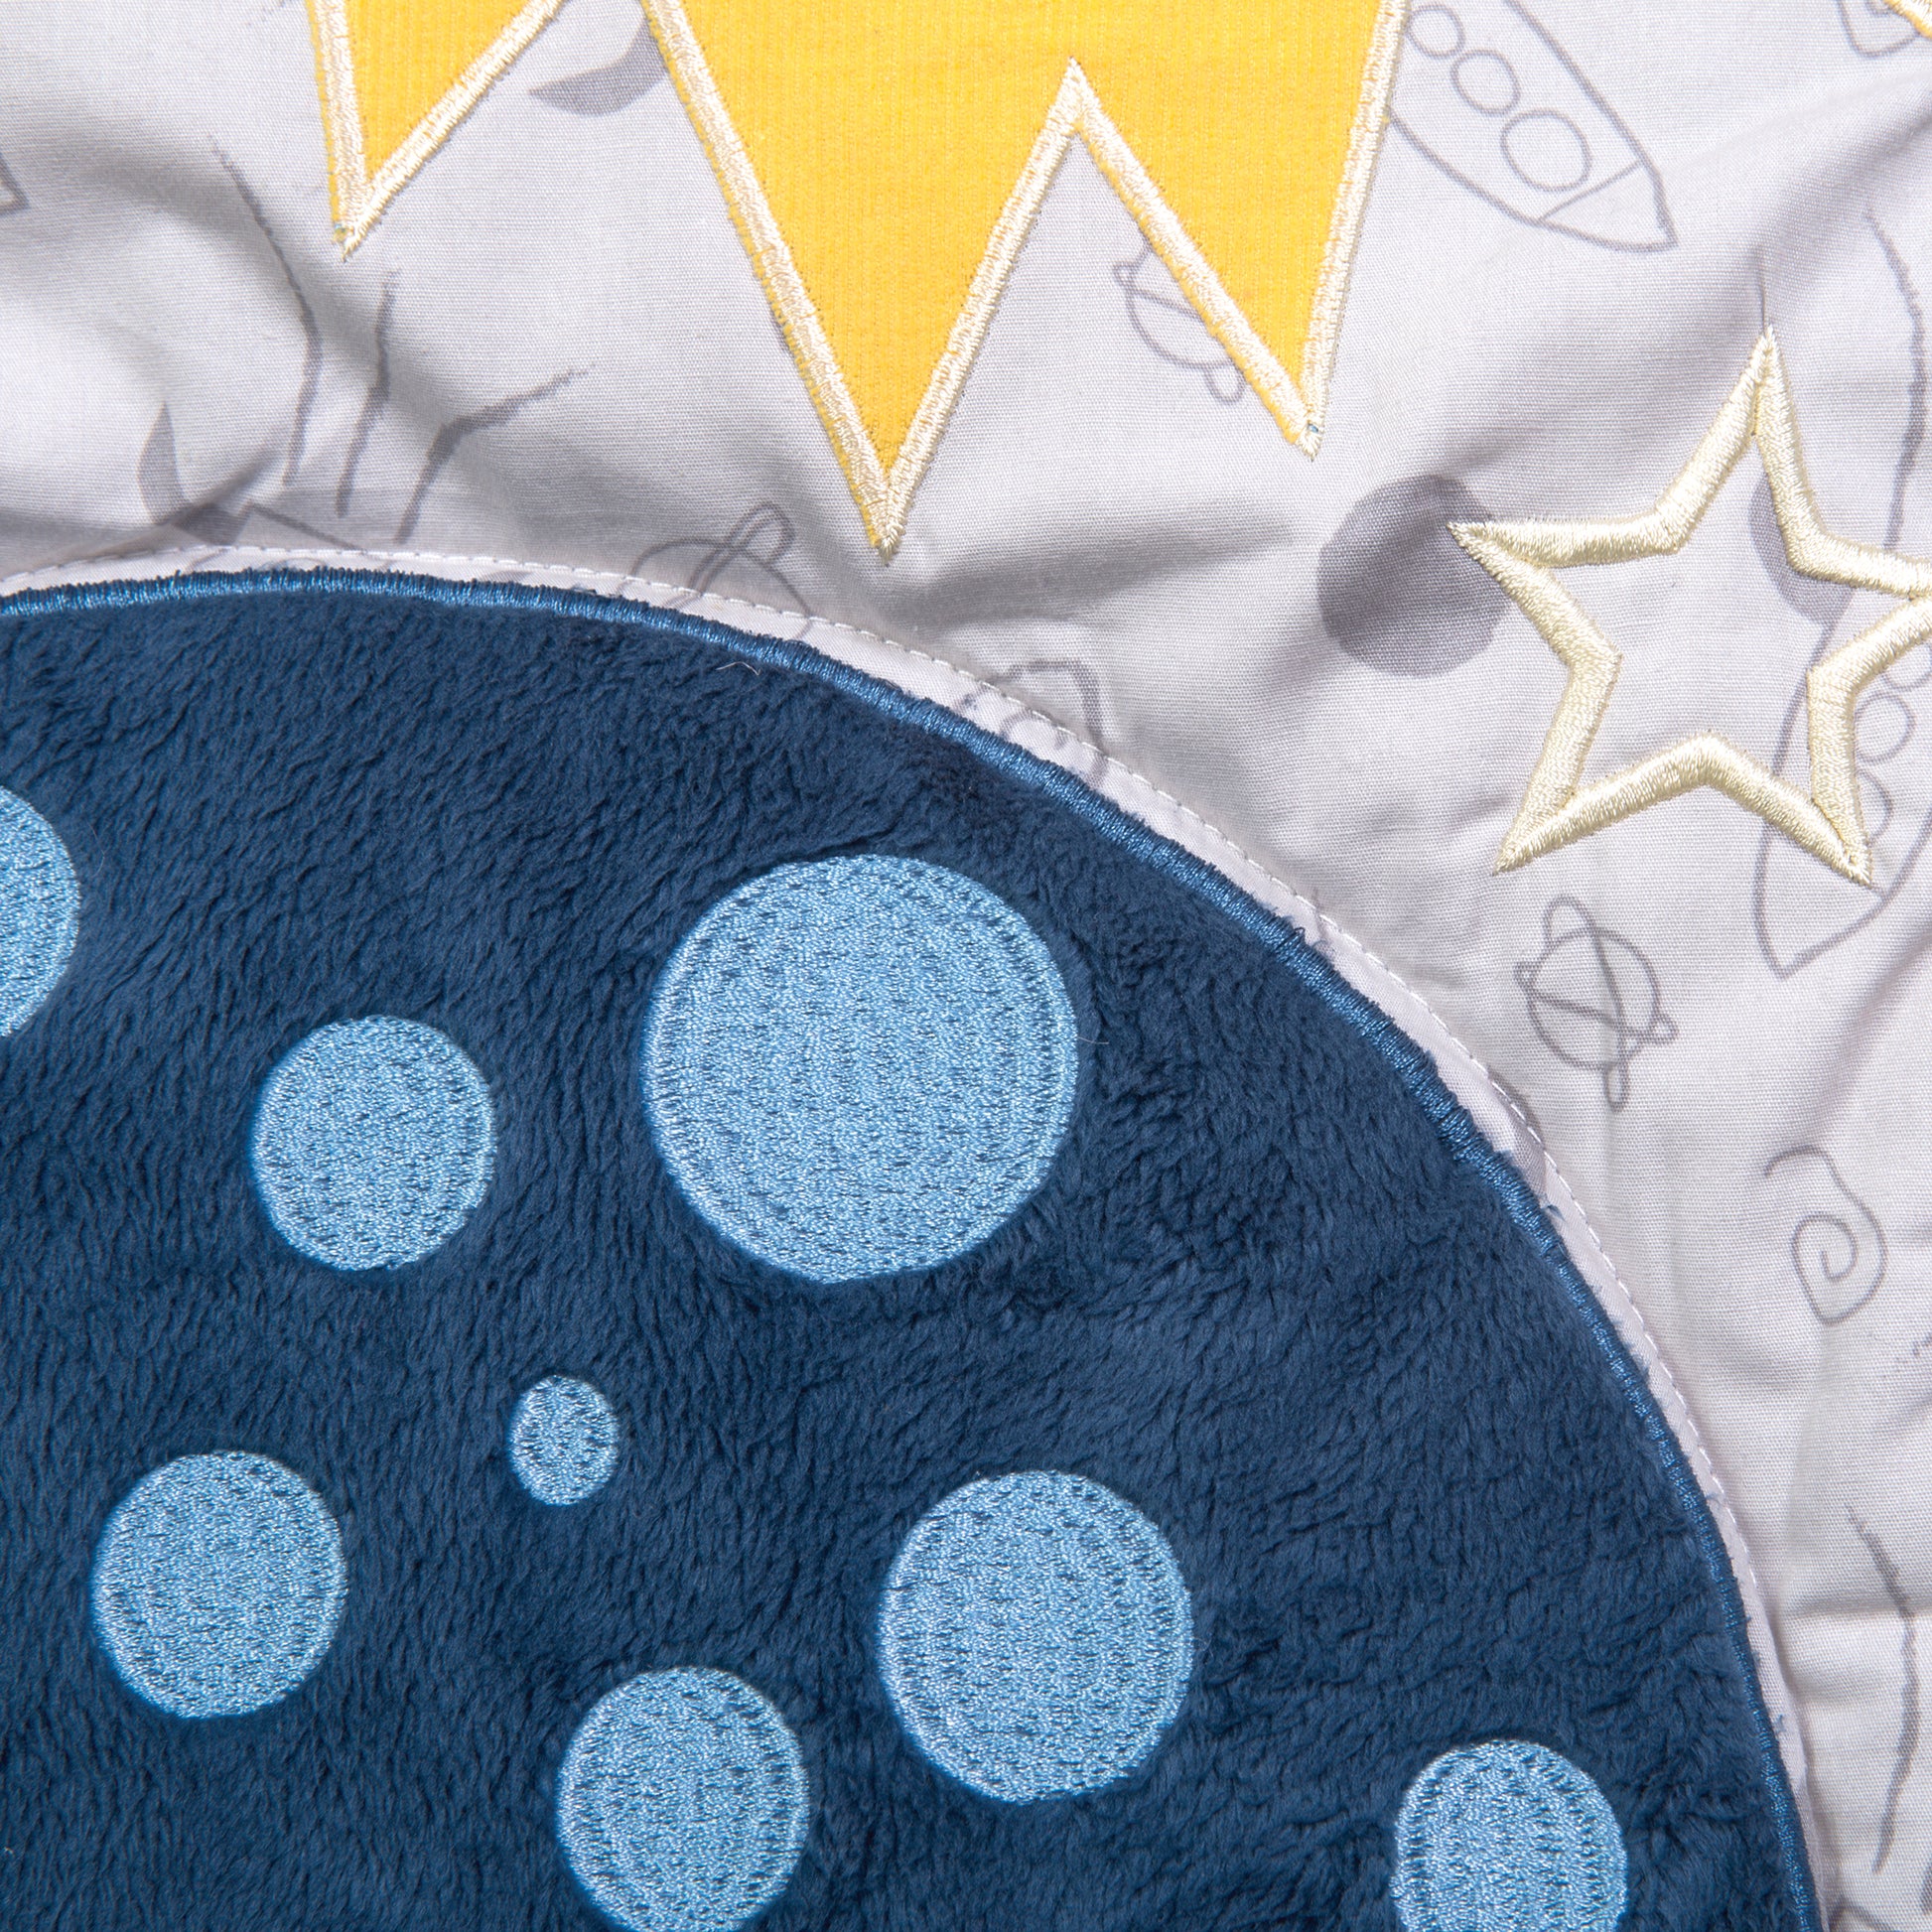 Reversible 100% cotton quilt measures 35 in x 45 in and features rocket ships scatter print with planet appliques bordered by solid and star constellations in navy blue, gray, white with pops of yellow. Quilt is backed in star constellations in navy blue 